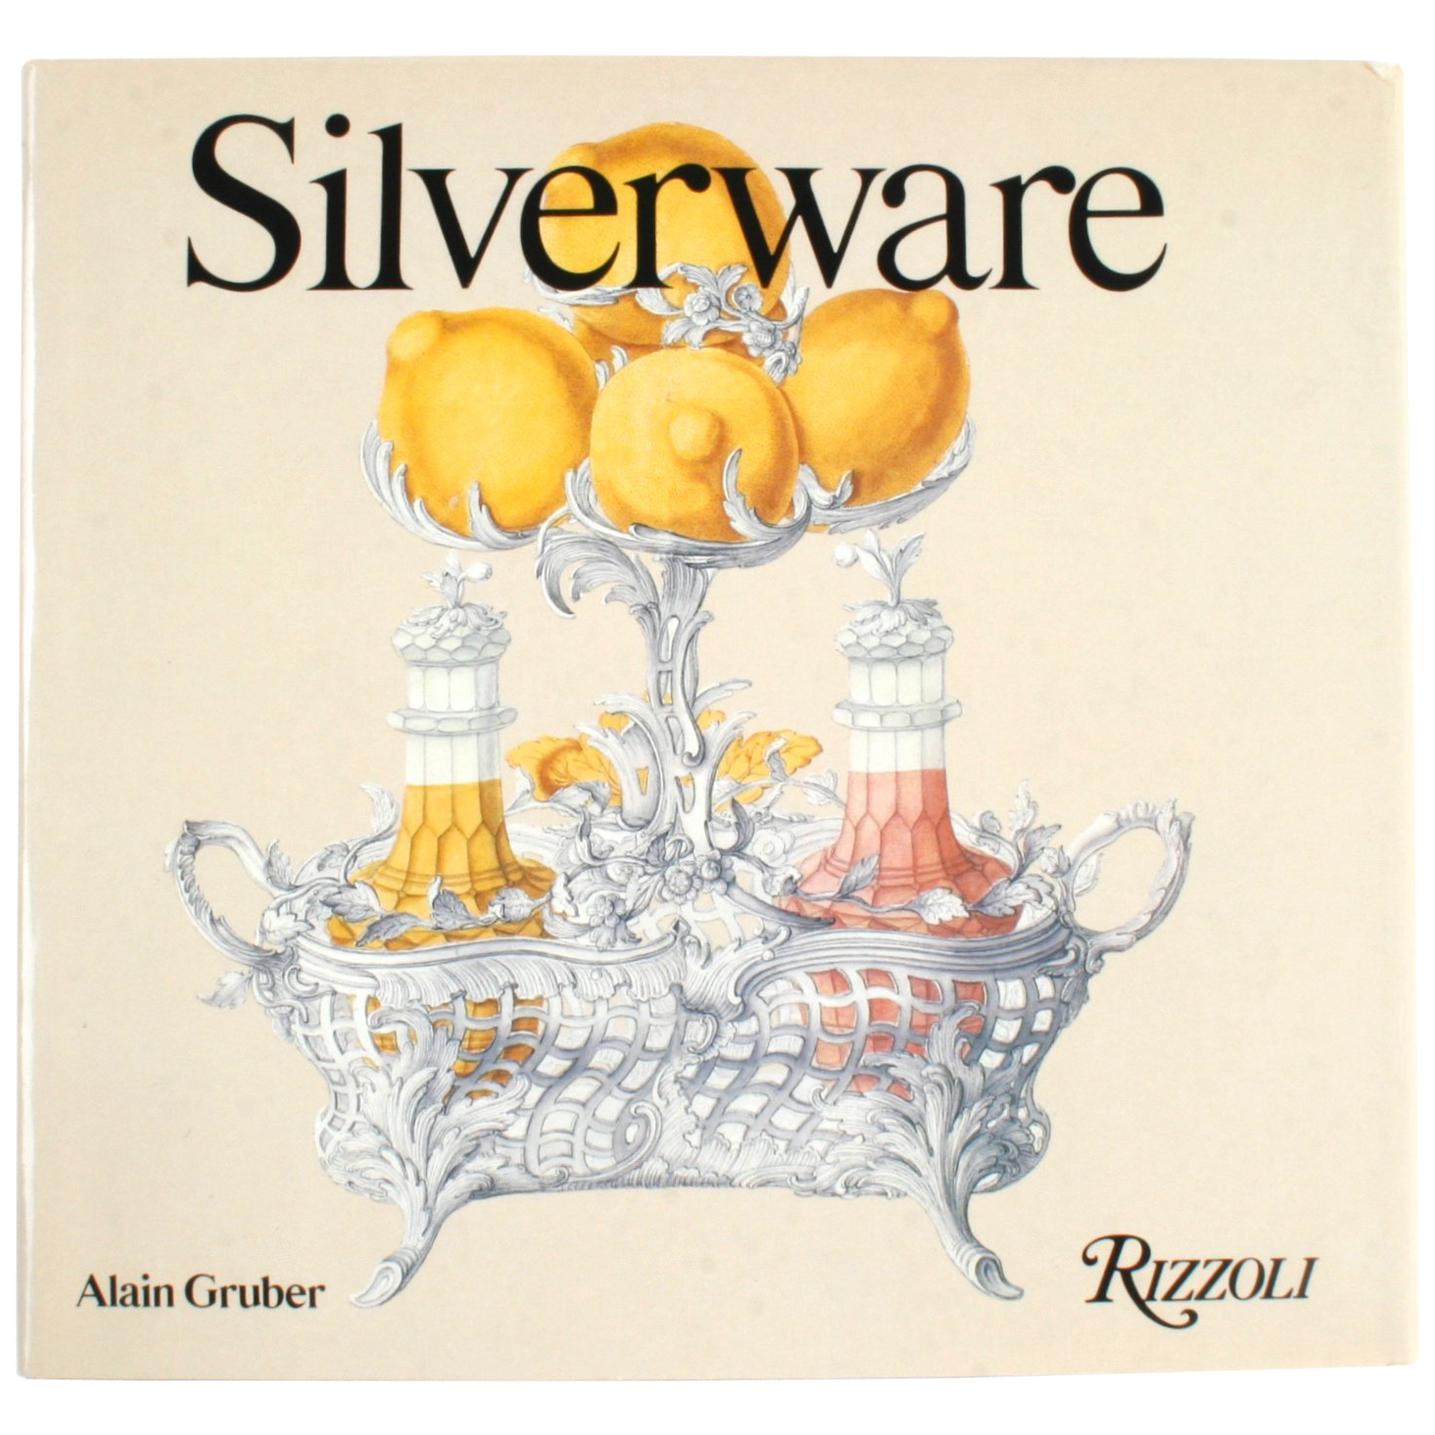 Silverware by Alain Gruber, First Edition Book